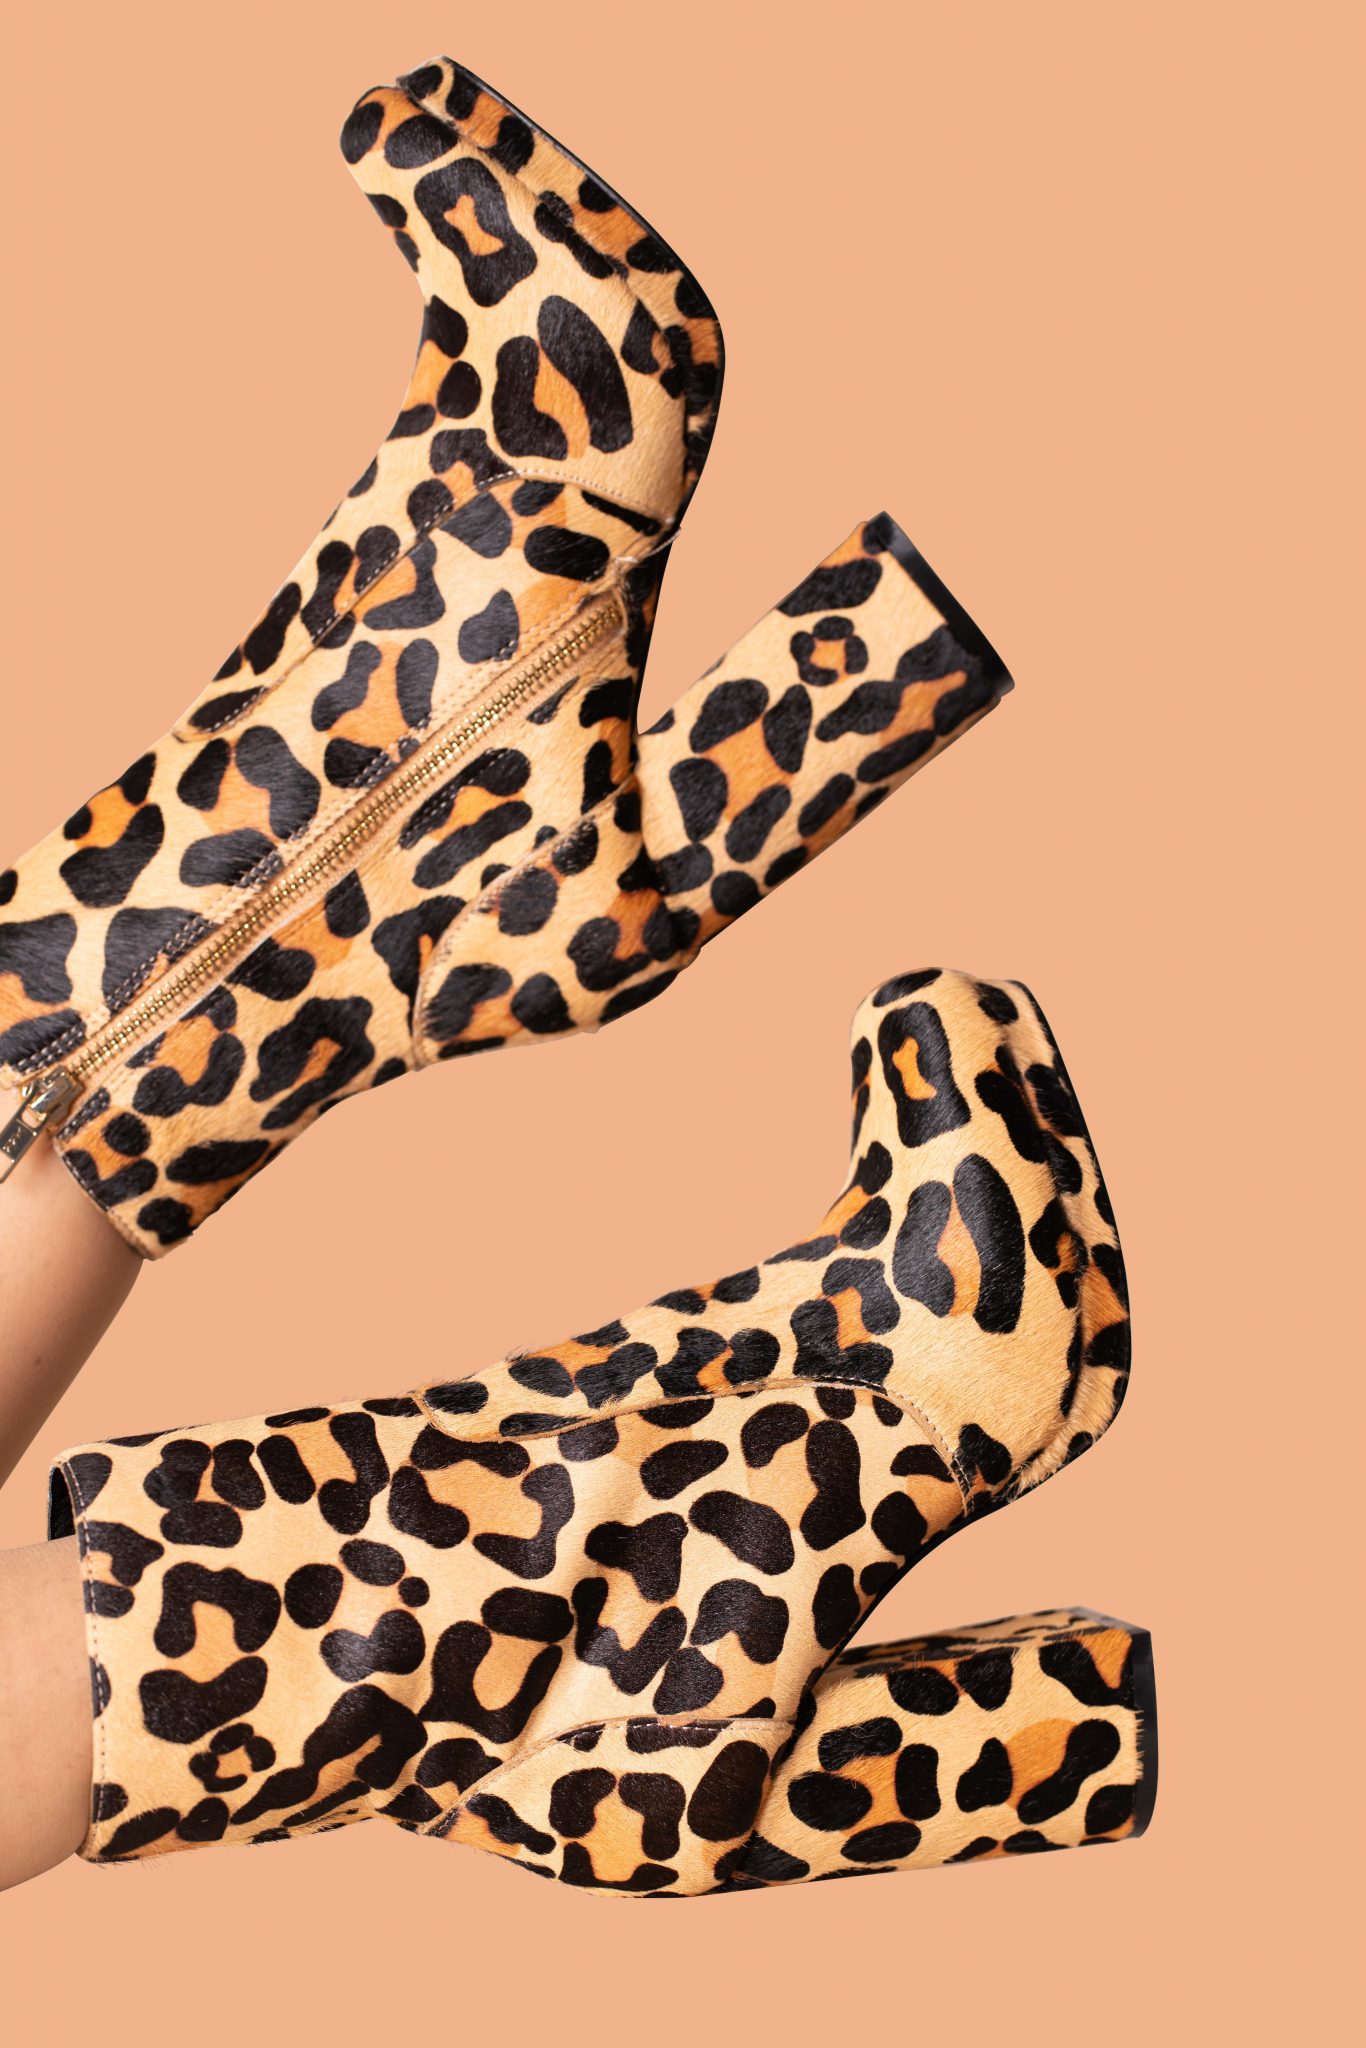 Commercial photo of leopard print boots